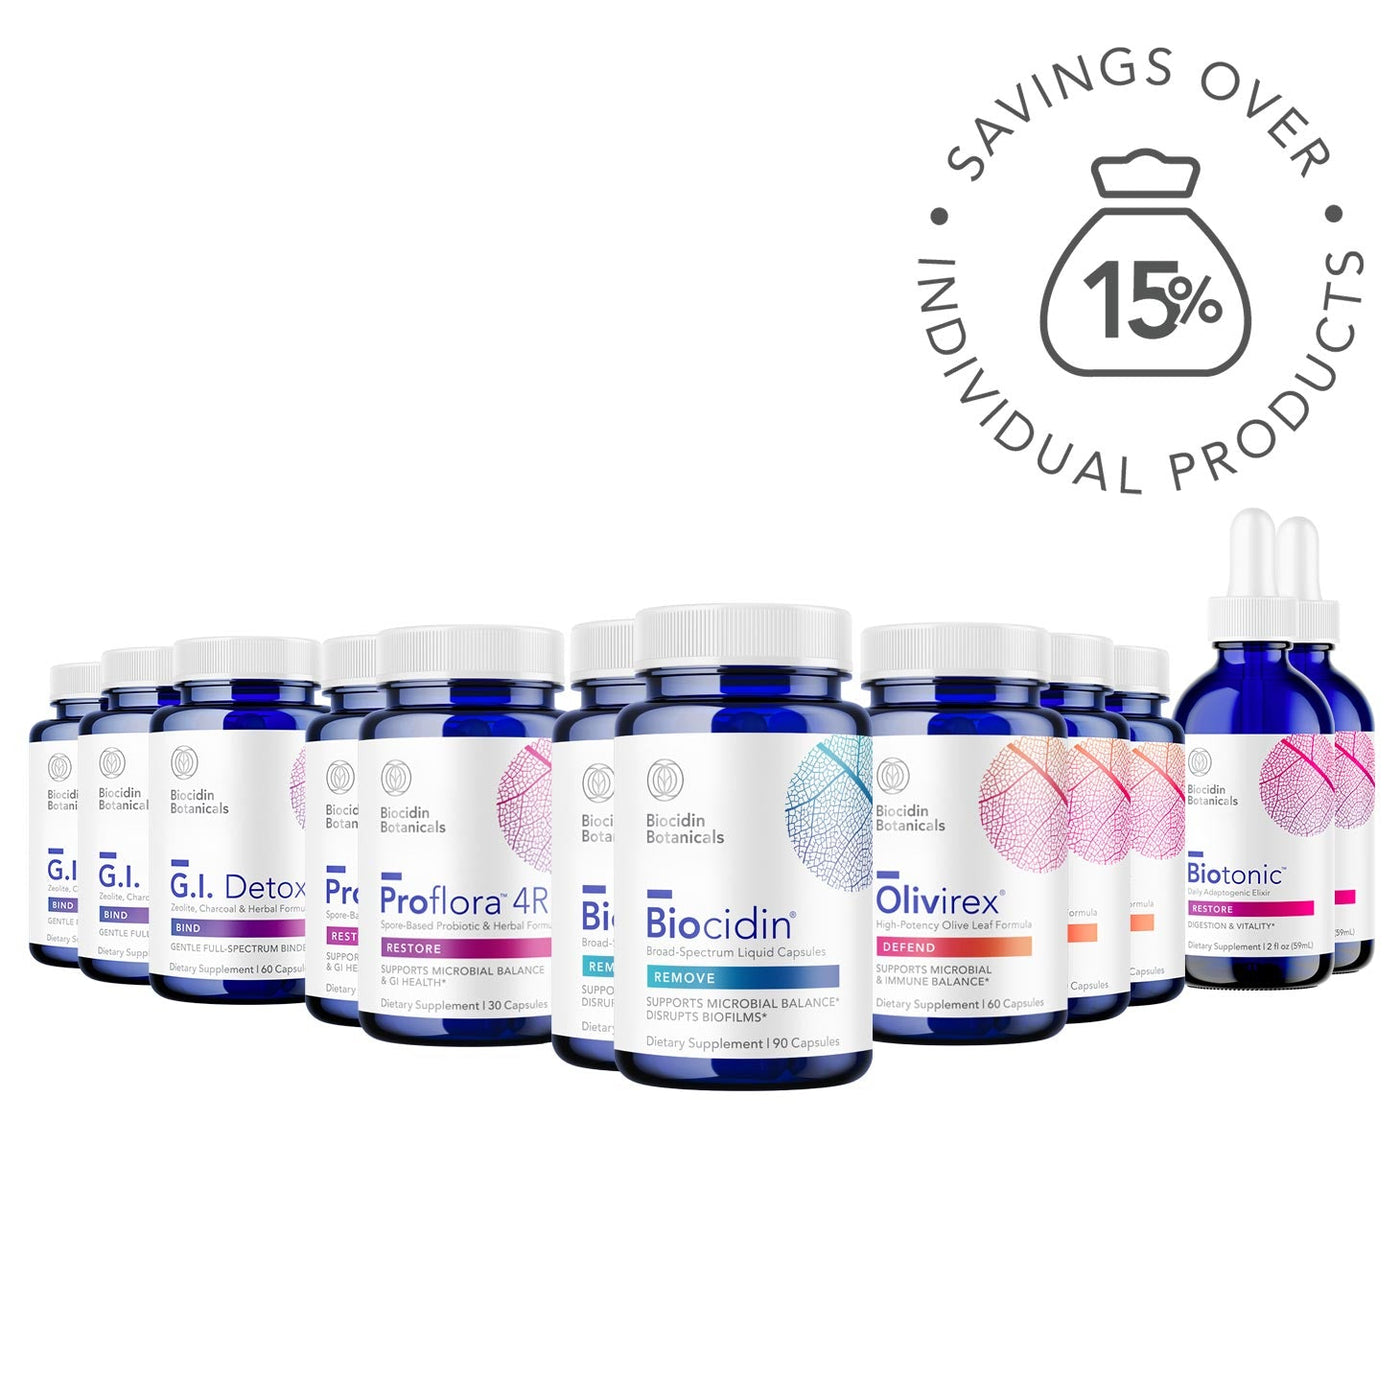 Comprehensive Cleansing Program with Biocidin® Capsules | Professional